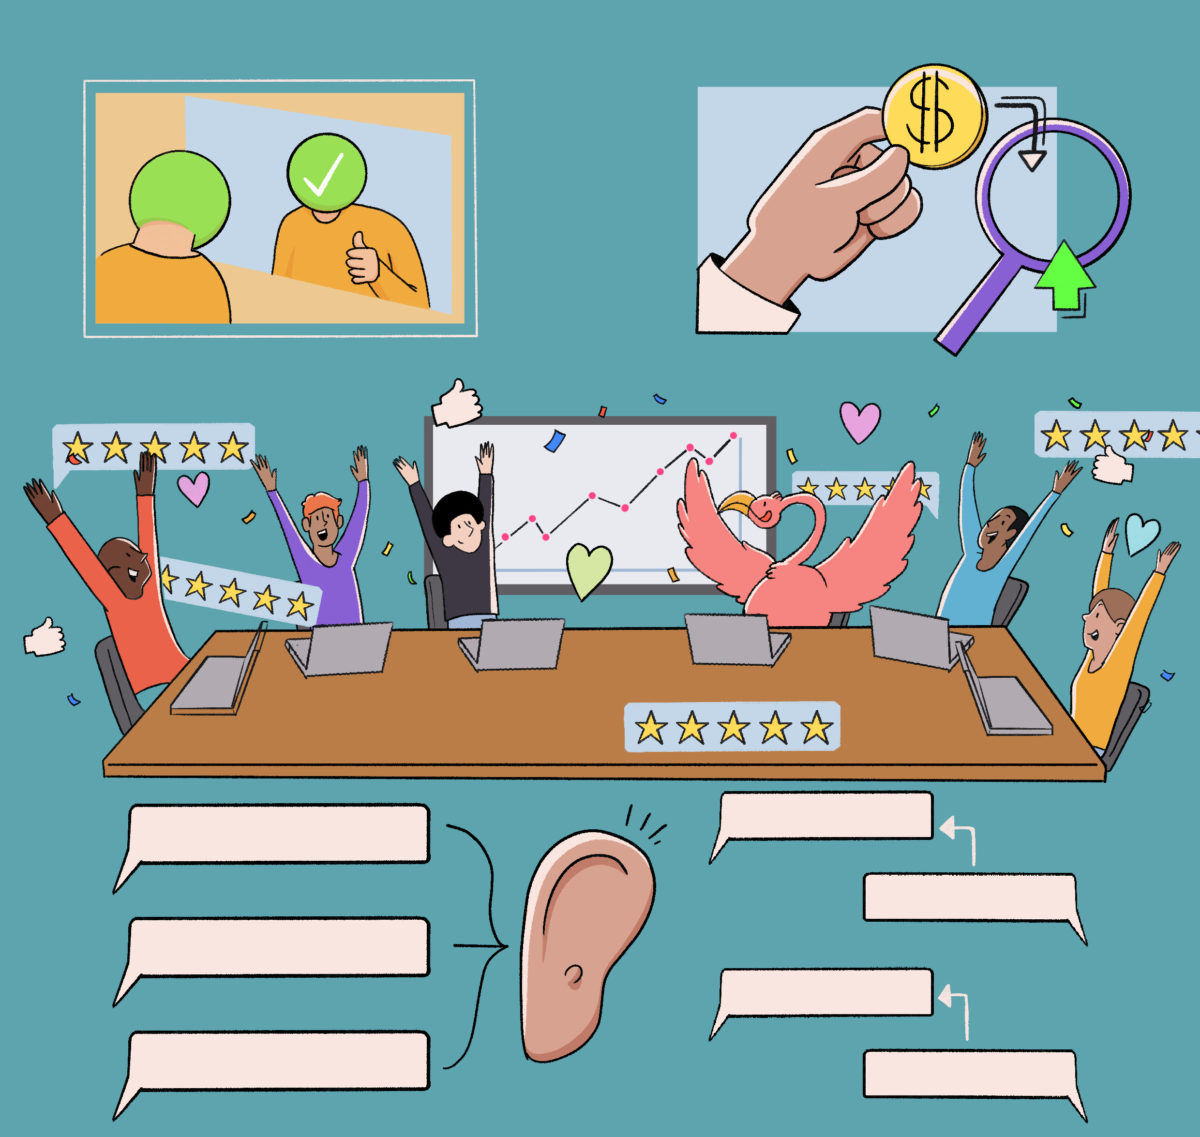 An illustration of a busy and dynamic office environment with multiple activities including collaboration, financial analysis, and employee motivation.